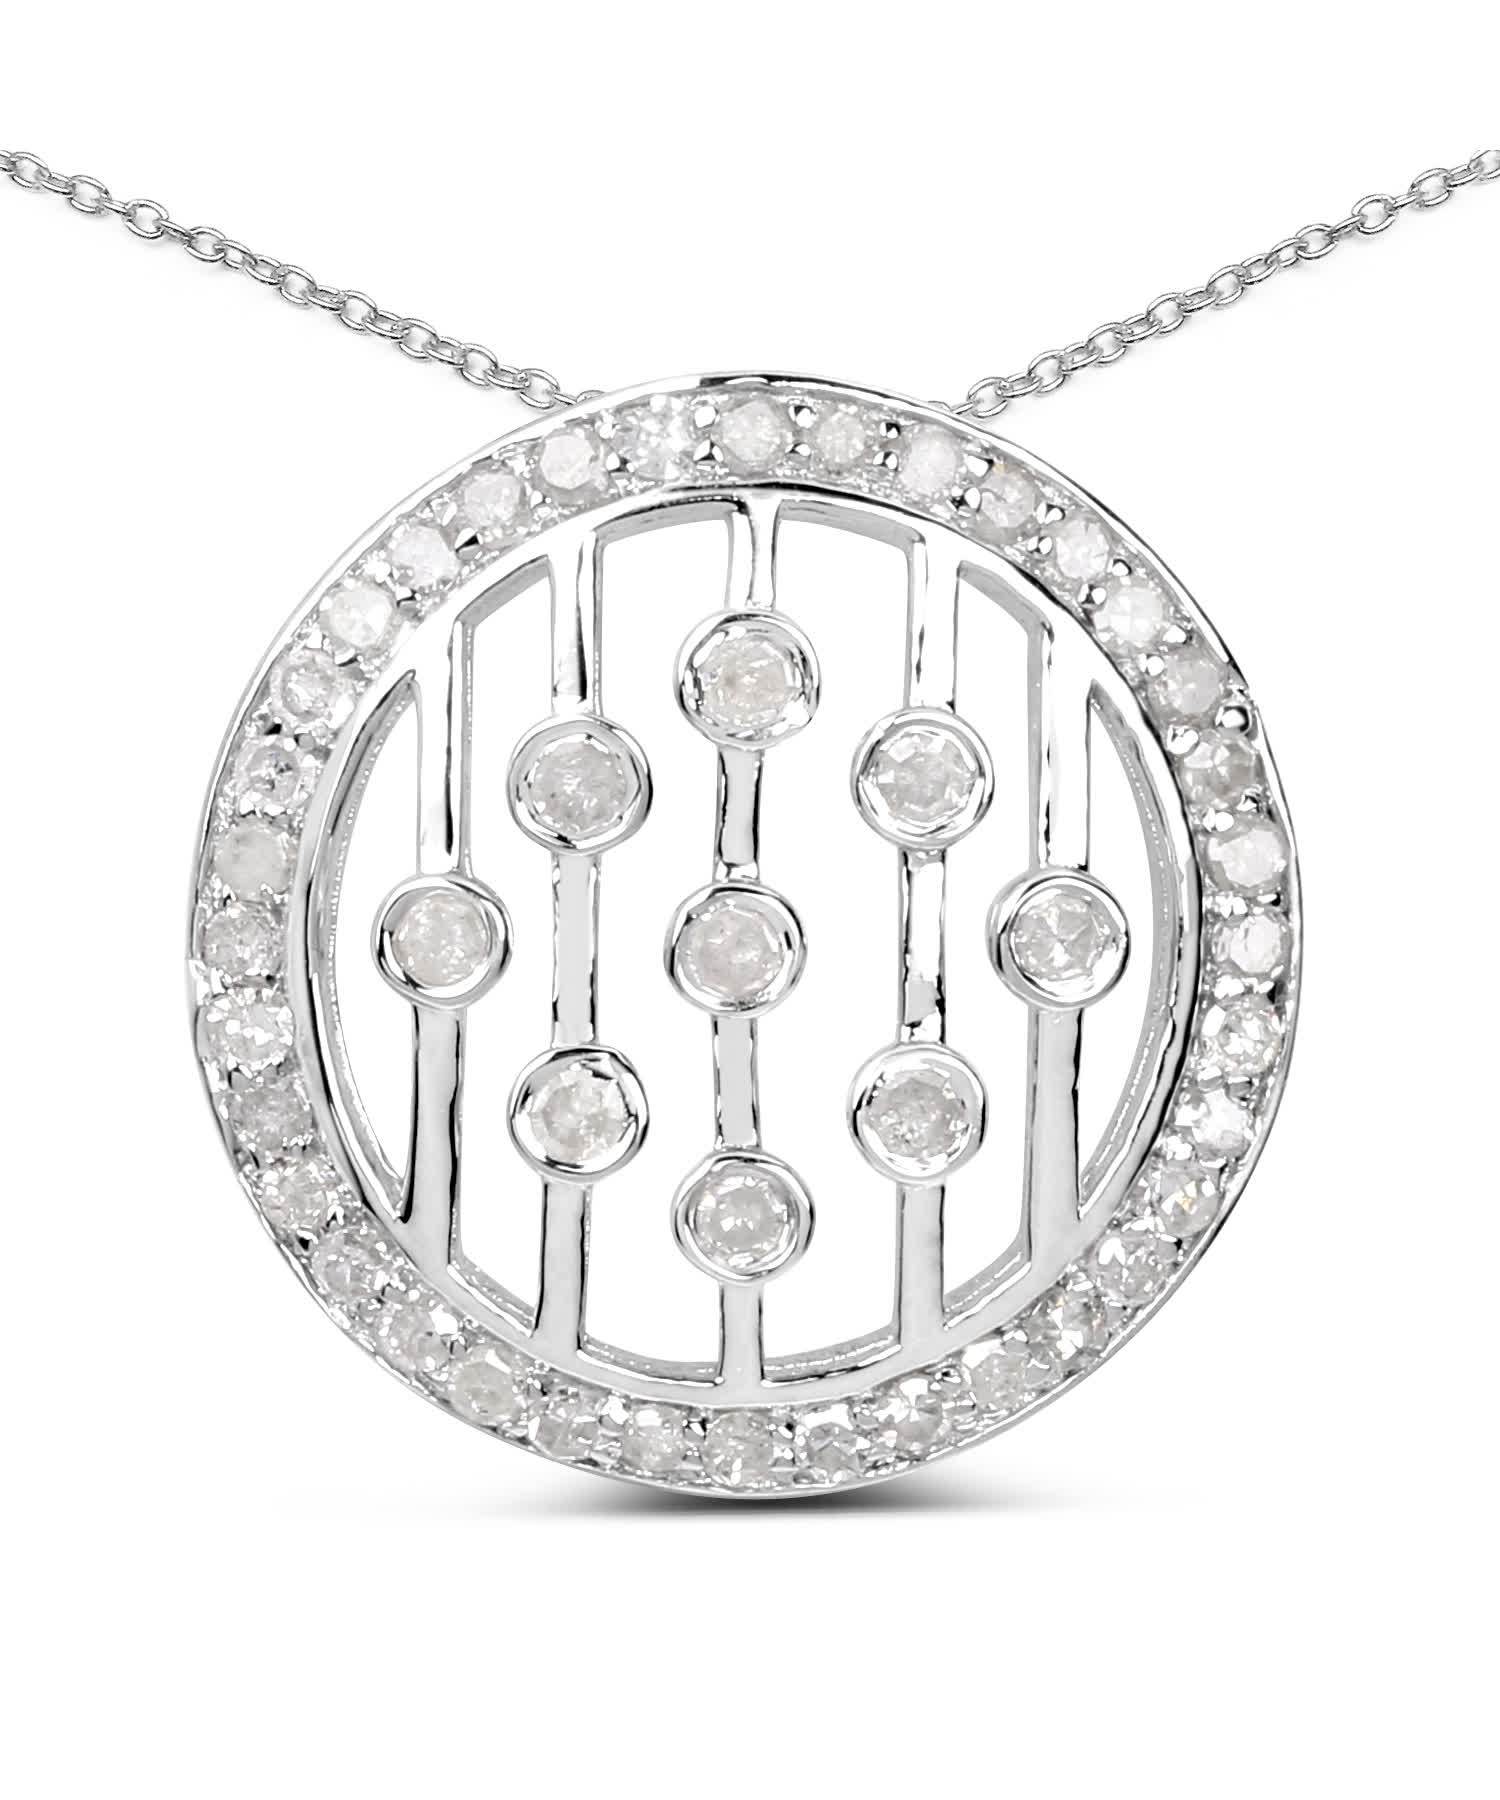 0.53ctw Icy Diamond Rhodium Plated 925 Sterling Silver Circle Pendant With Chain View 1